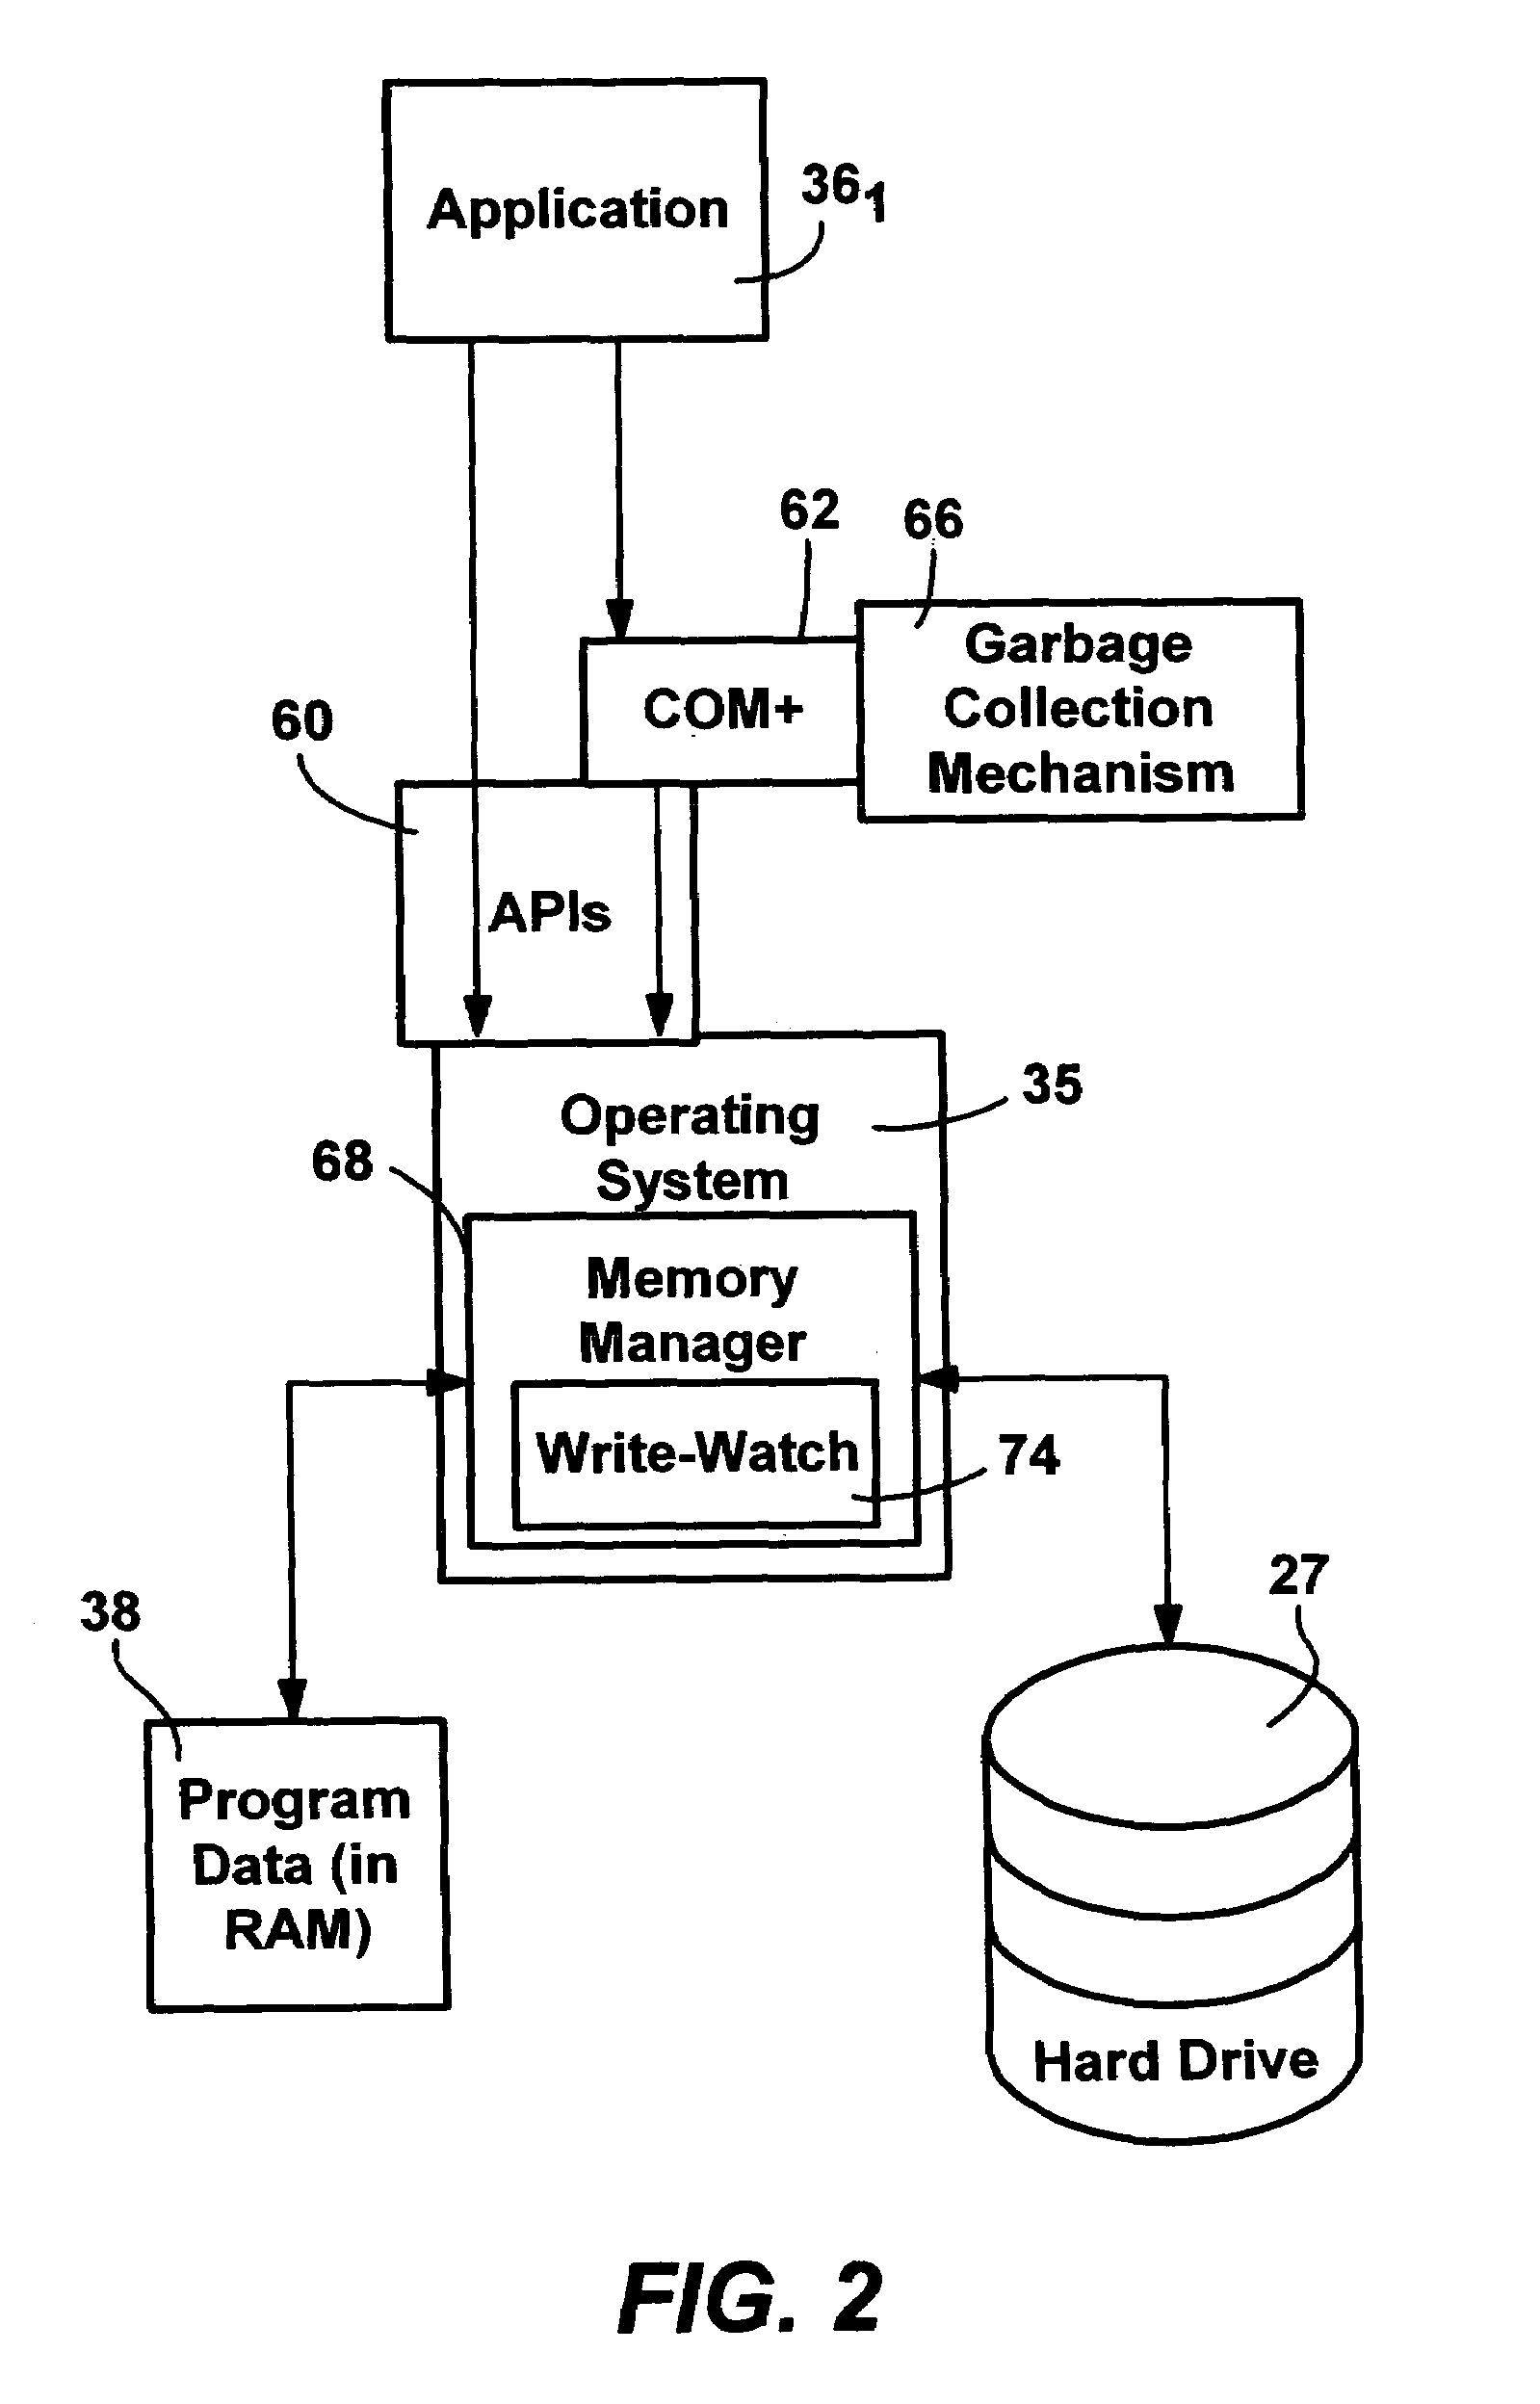 Efficient write-watch mechanism useful for garbage collection in a computer system